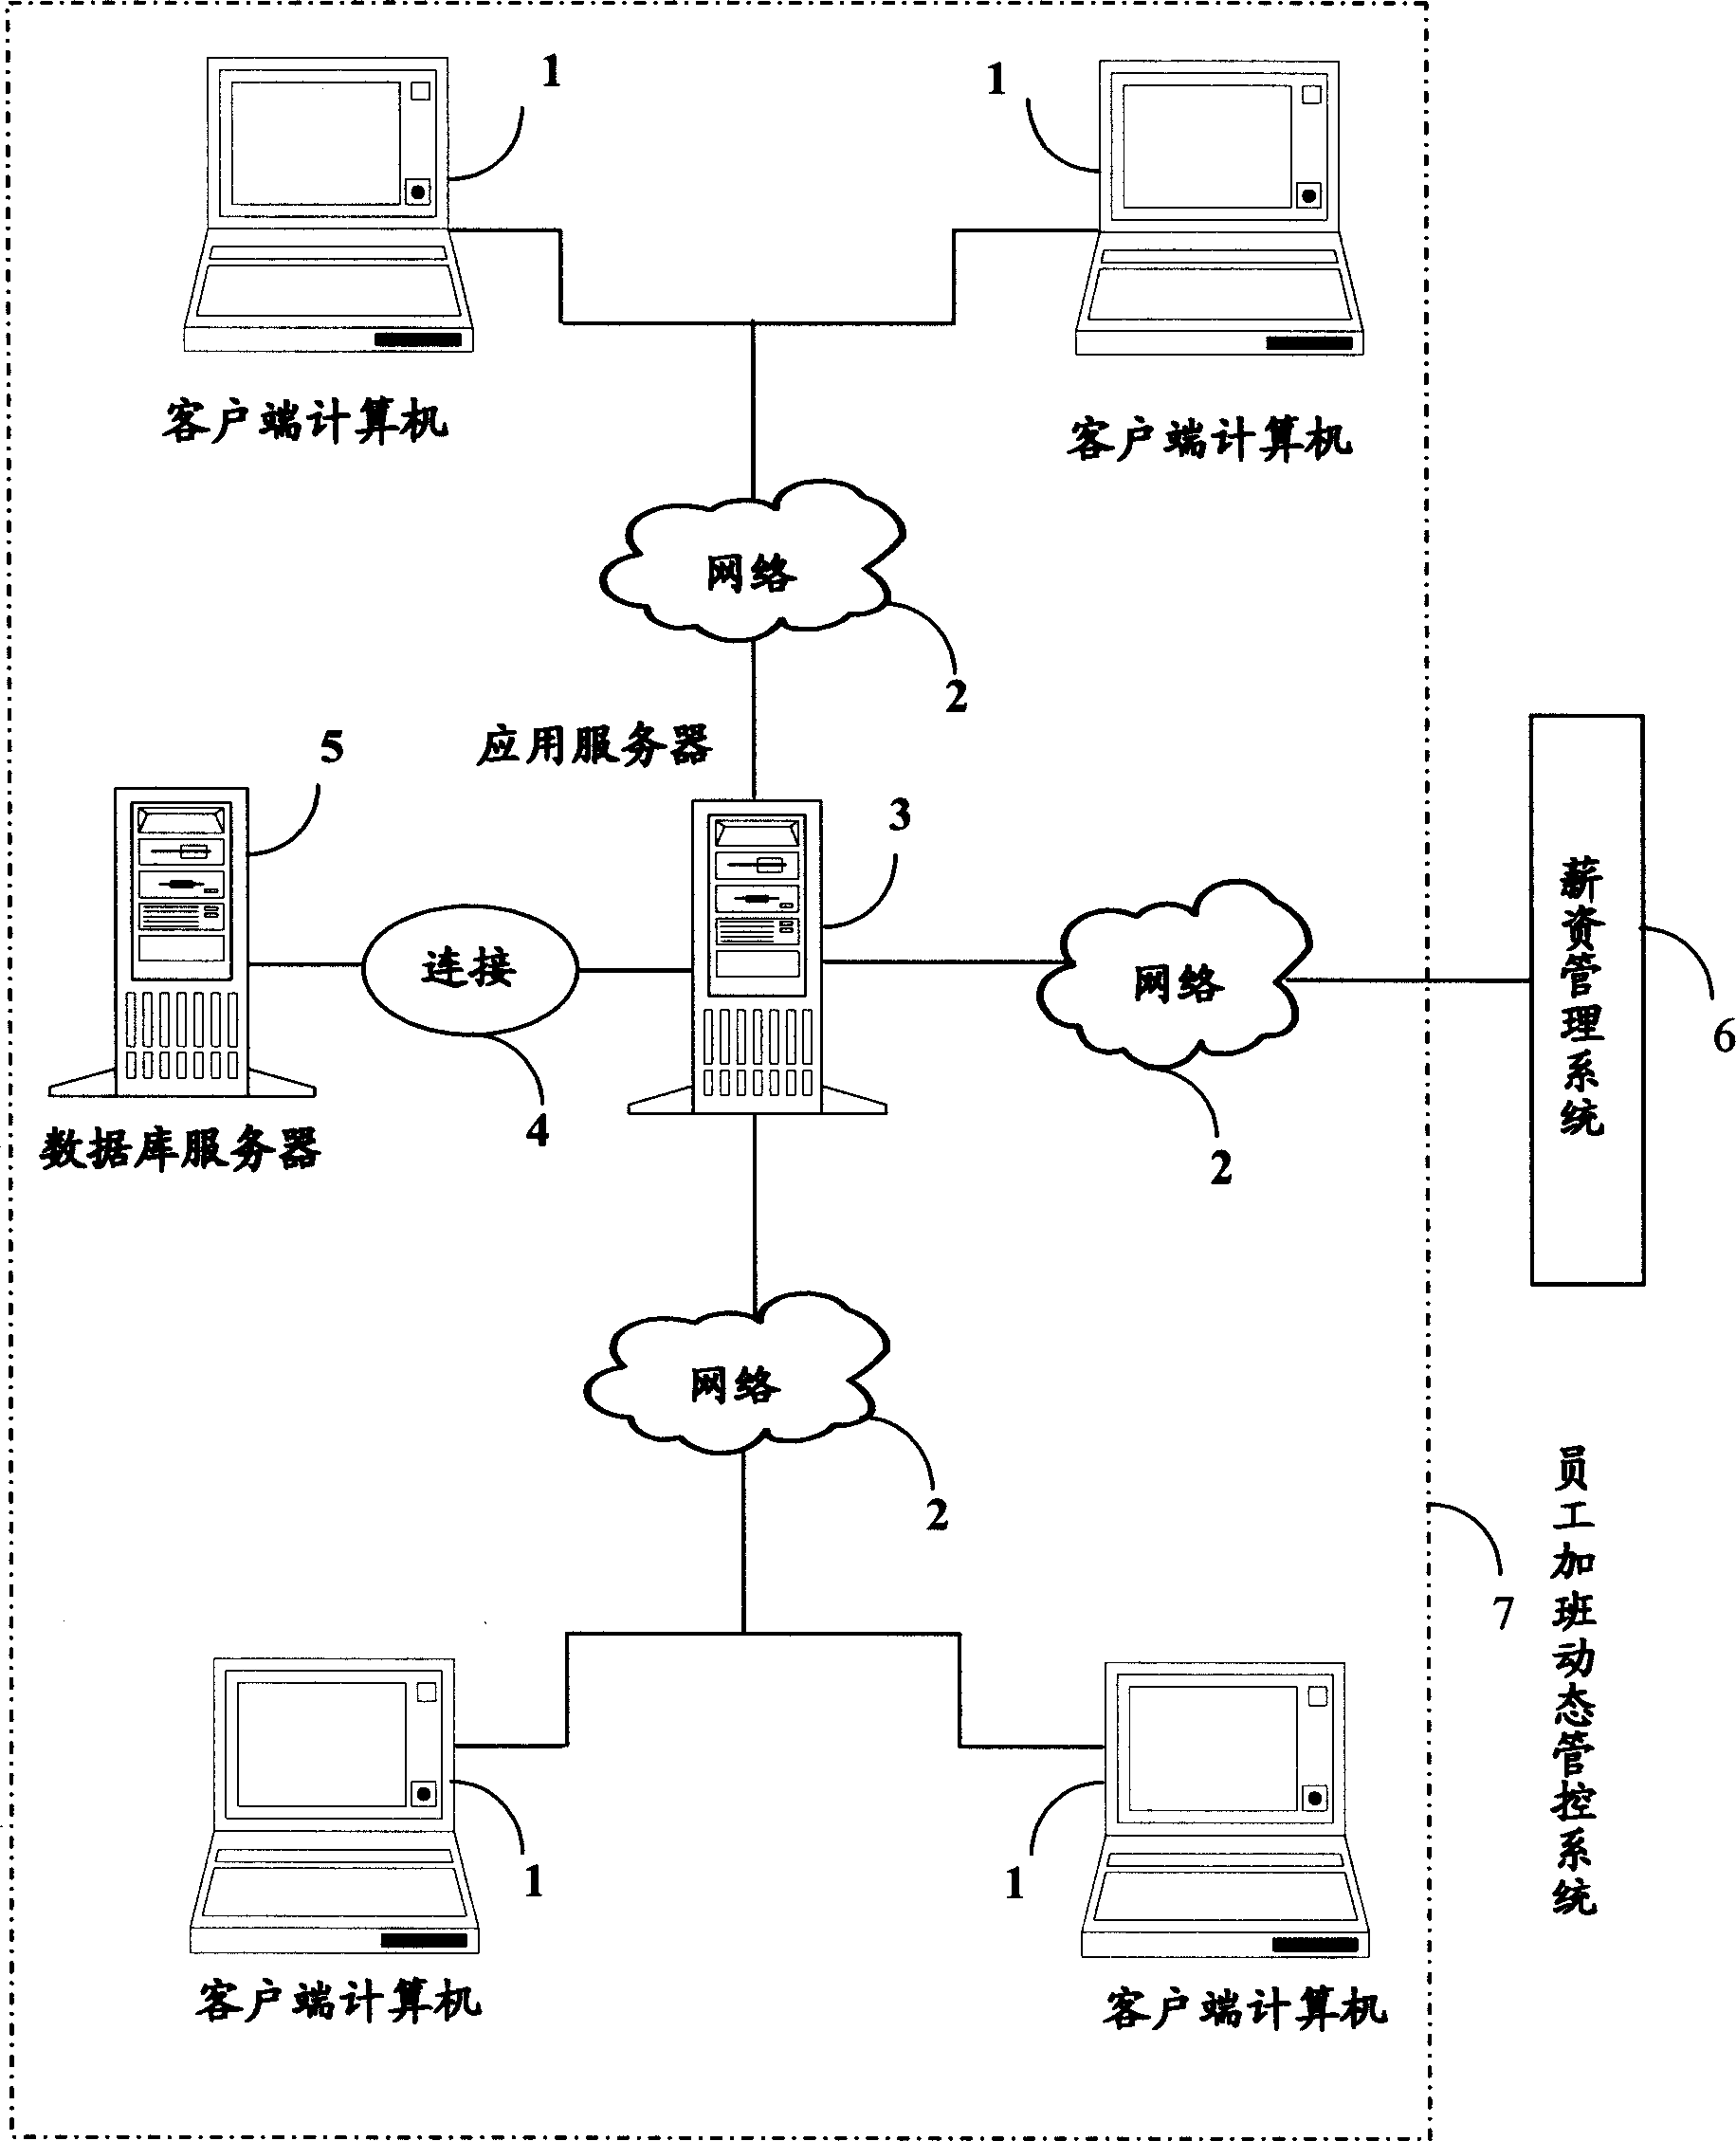 Dynamic controlling system and method for employee extra duty